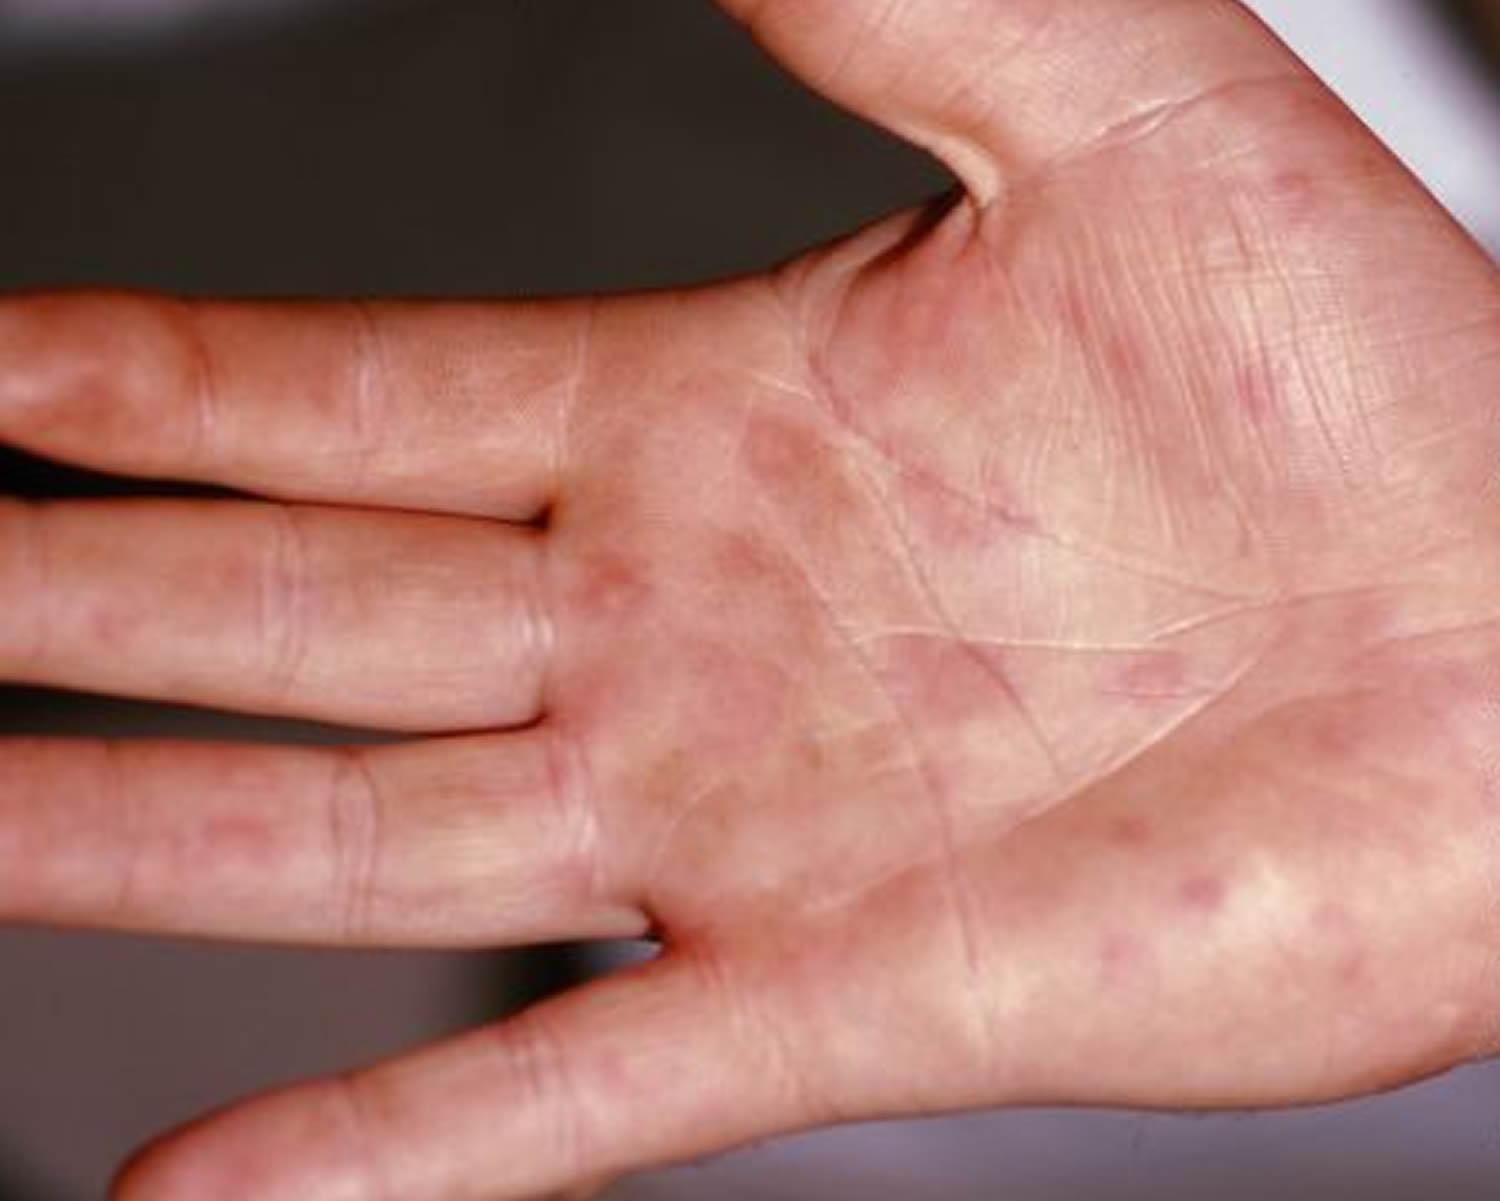 What causes hives on hands and legs